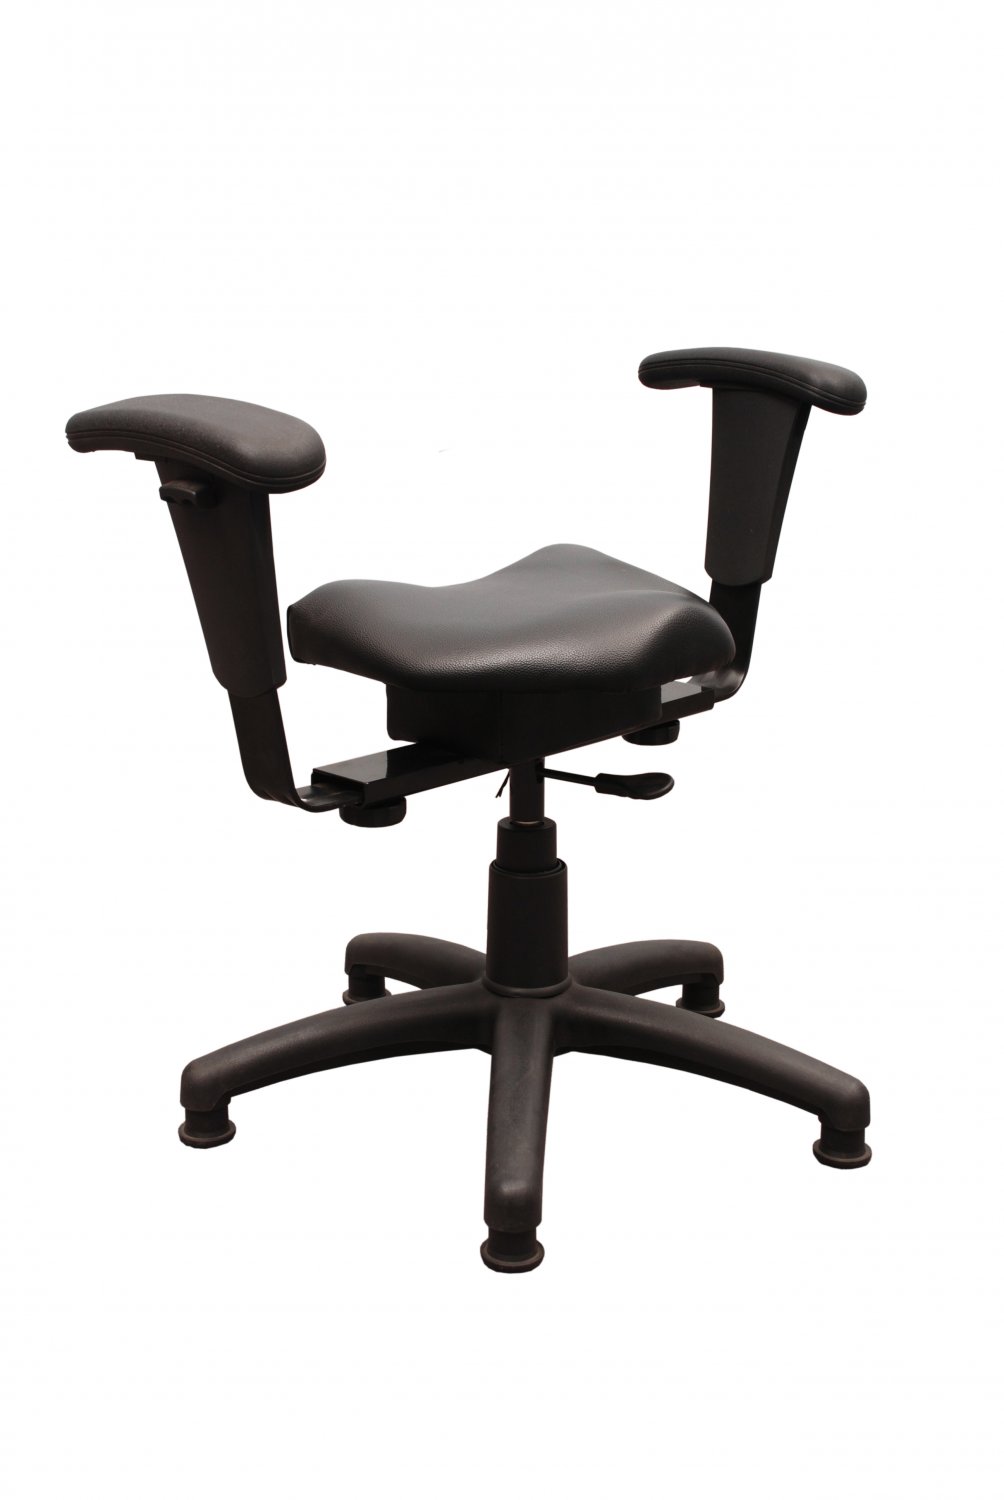 Therapeutic Wobble Chair - Low Back Pain - Pettibon System